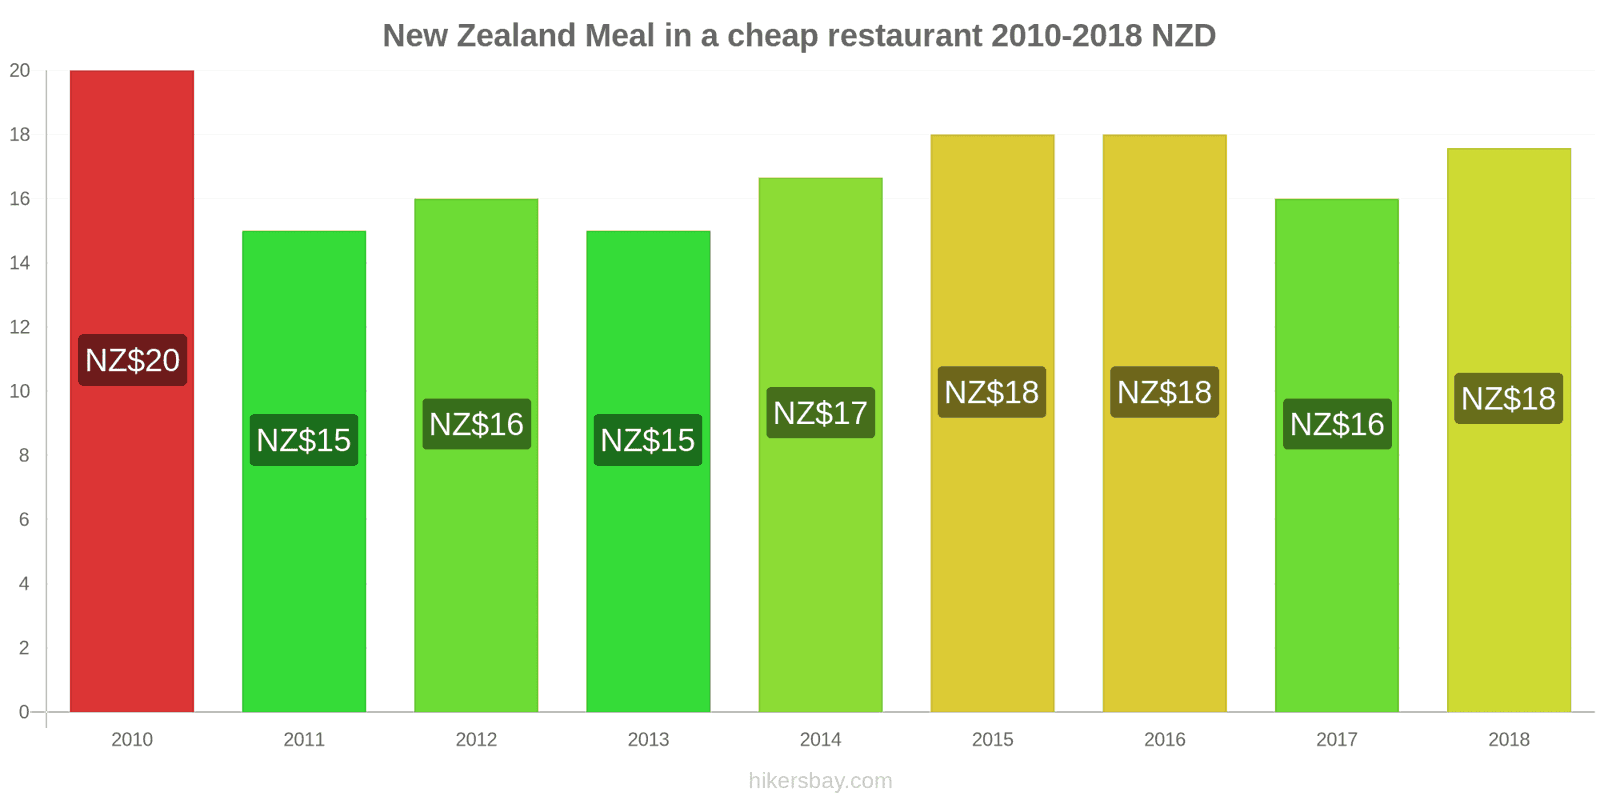 New Zealand price changes Meal in a cheap restaurant hikersbay.com